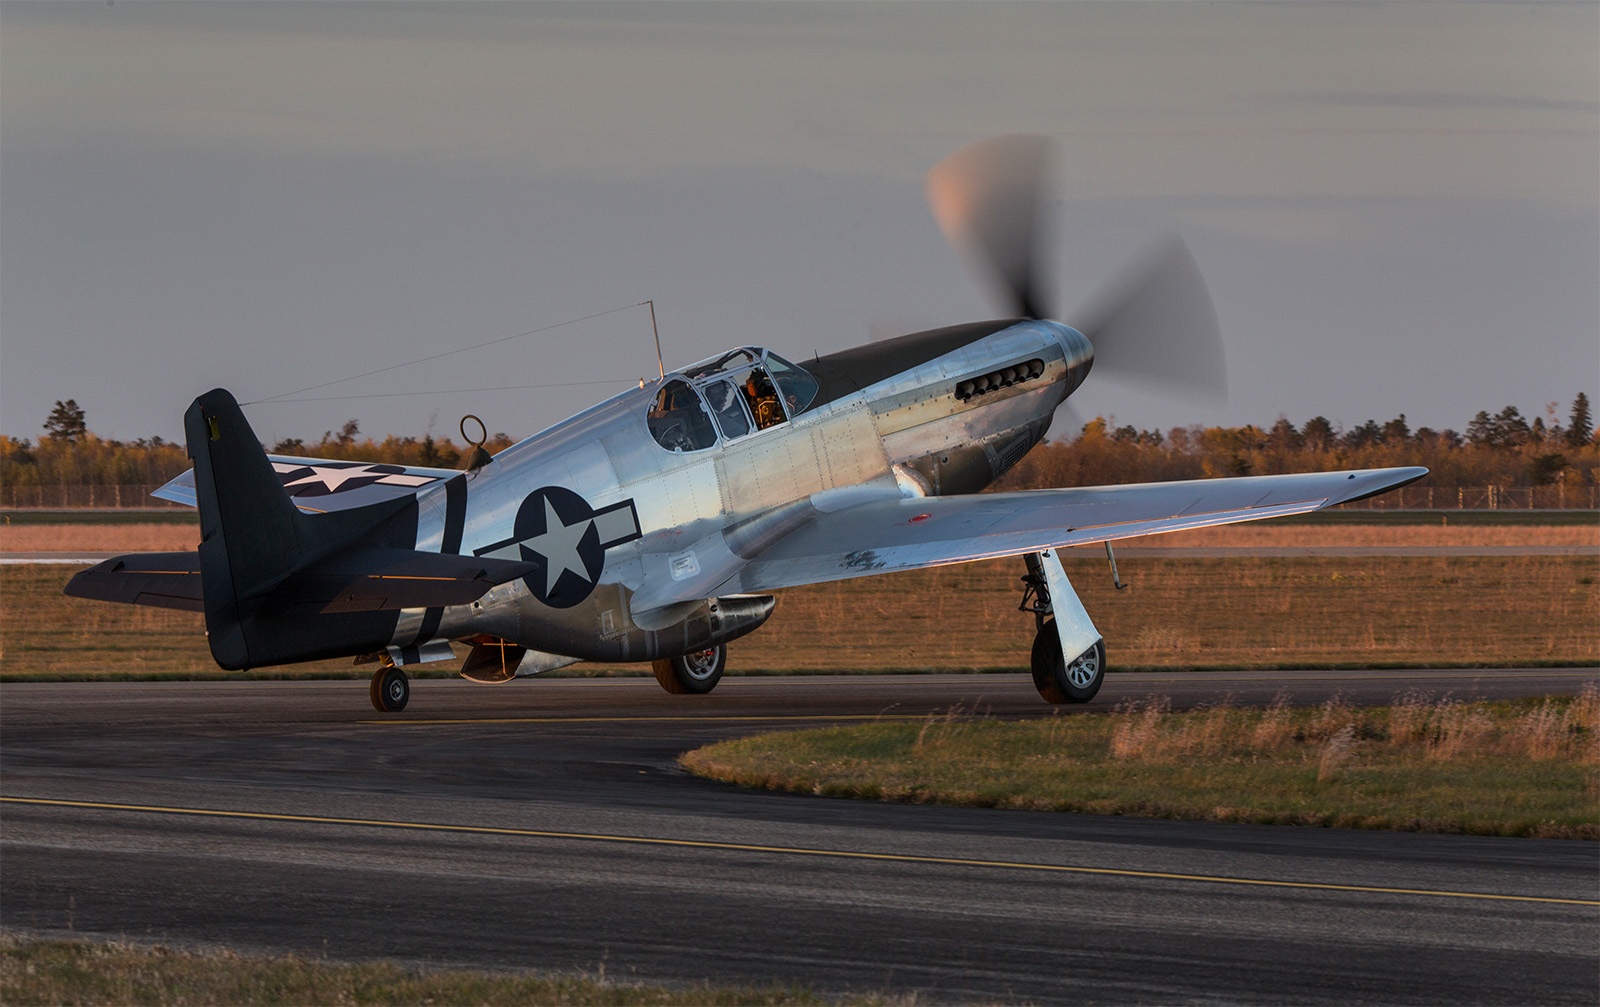 As twilight descended, it was finally time for what everyone at AirCorps Aviation and Texas Flying Legends Museum had been waiting for since restoration began in earnest on October 1st, 2014. It took three years and about two weeks before this P-51C-10NT flew again for the first time. (photo by John LaTourelle via AirCorps Aviation)